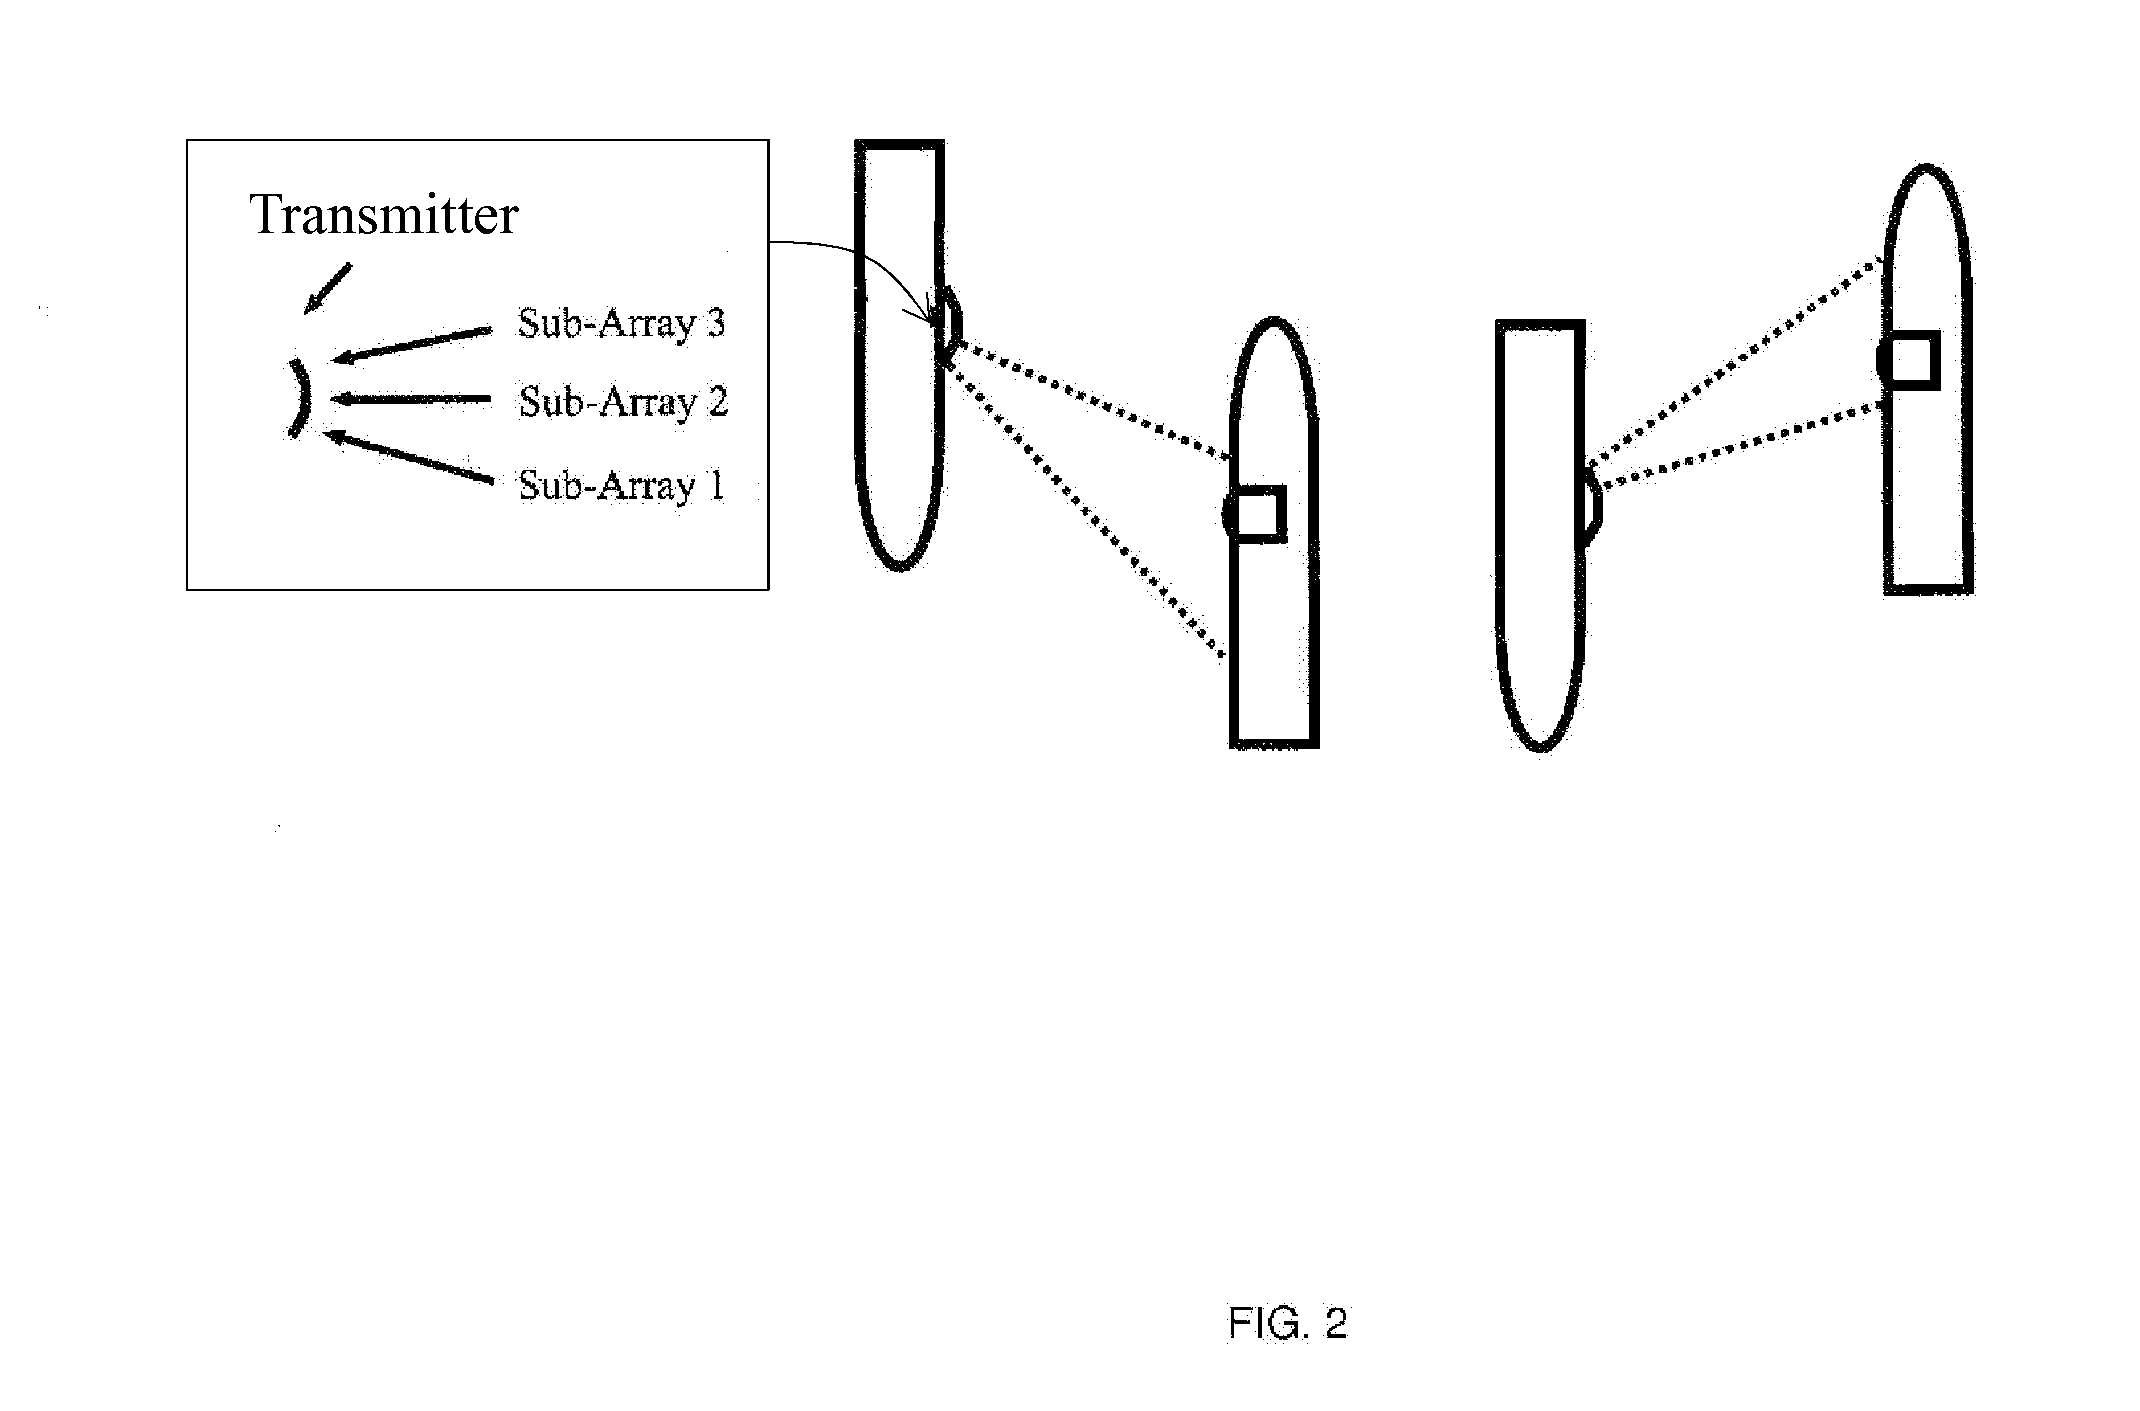 High-bandwith underwater data communication system